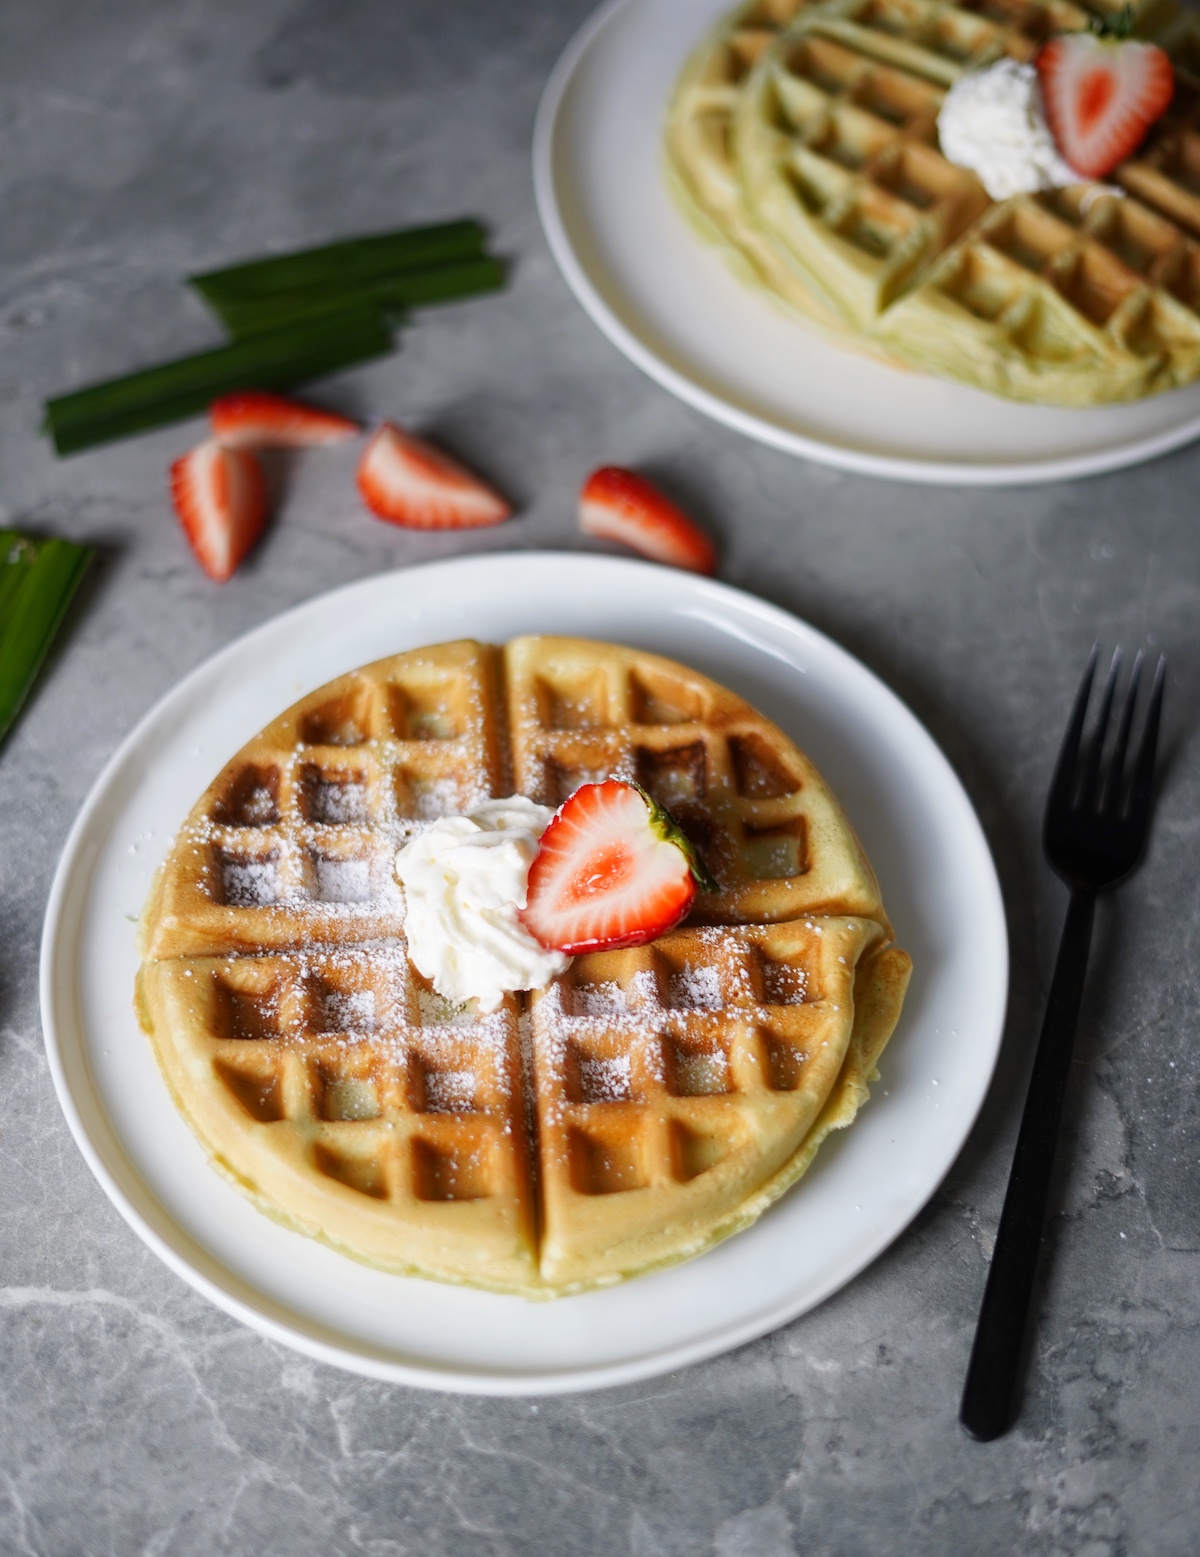 A plate with a crispy and chewy pandan waffle topped with strawberries and whipped cream.